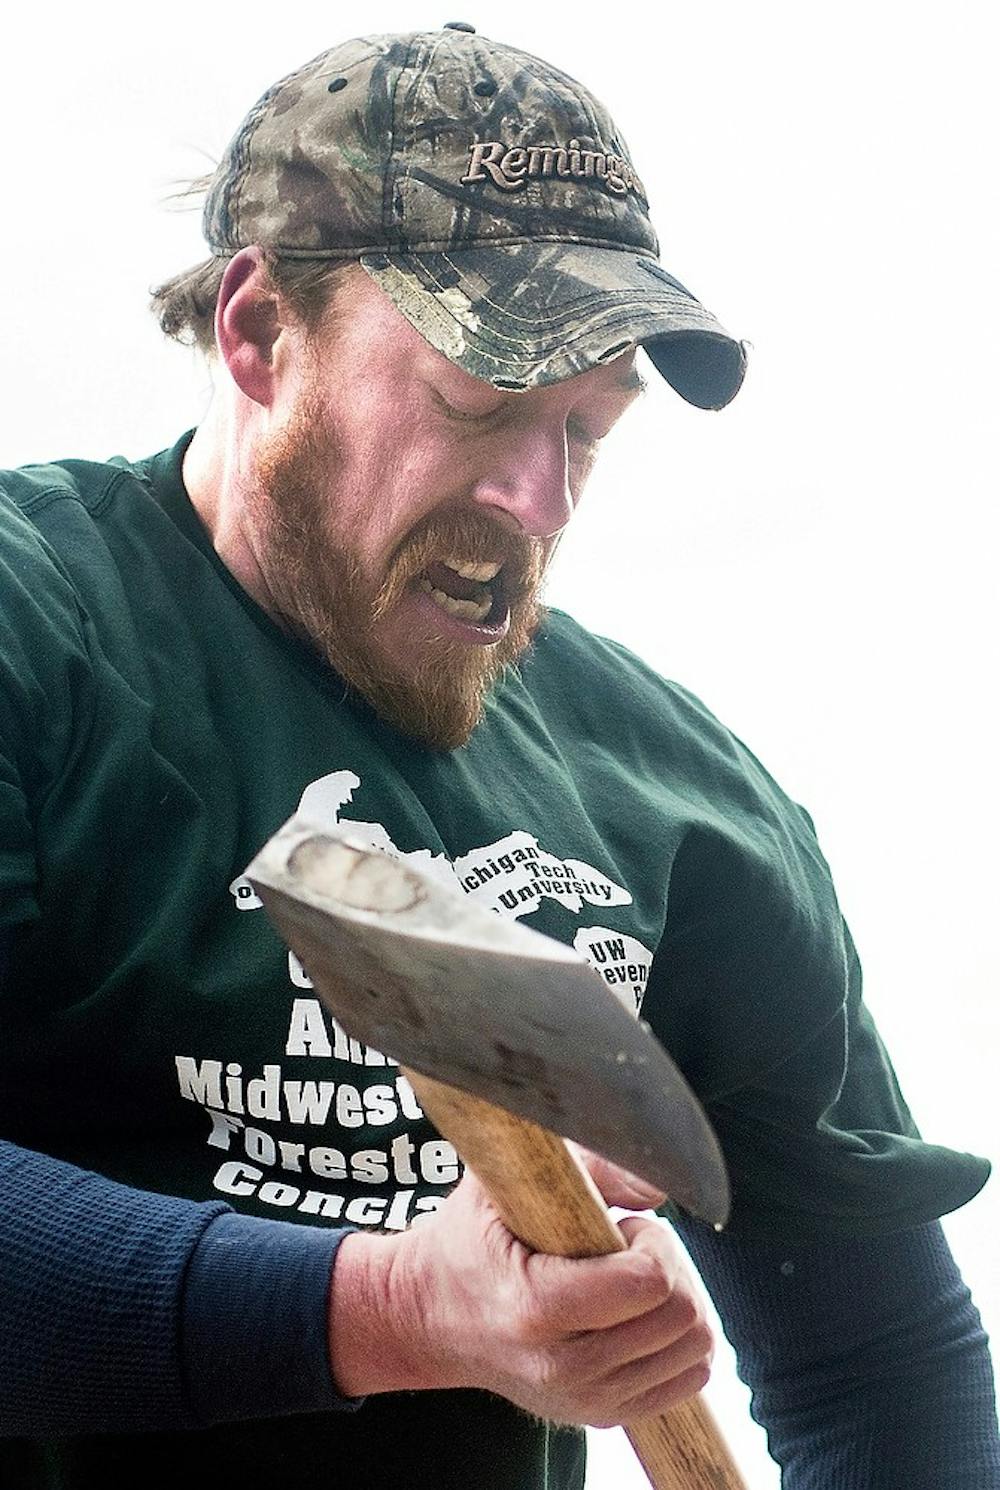 	<p><span class="caps">MSU</span> Forestry Club member Dan Brown grunts as he chops a piece of wood April 6, 2013 at the Ingham County Fairgrounds in Mason, Mich. The event hosted by <span class="caps">STIHL</span> Timbersports featured lumberjack events performed by both professional and collegiate competitors. Adam Toolin/The State News</p>